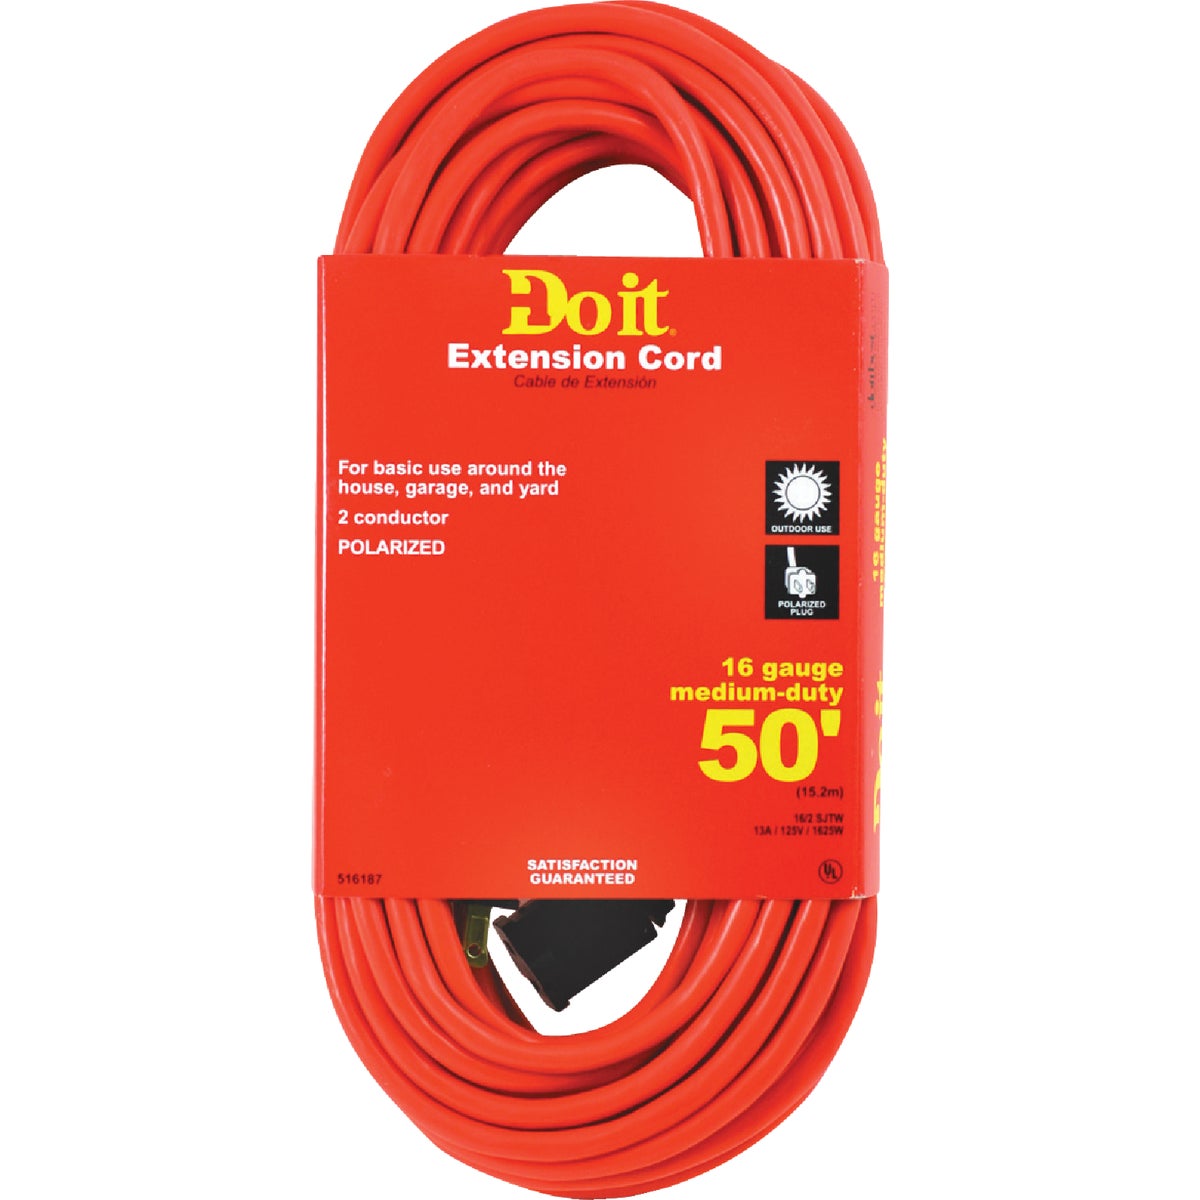 SIM Supply, Inc. OU-JTW162-50-OR Do it 50 Ft. 16/2 Polarized Outdoor Extension Cord OU-JTW162-50-OR